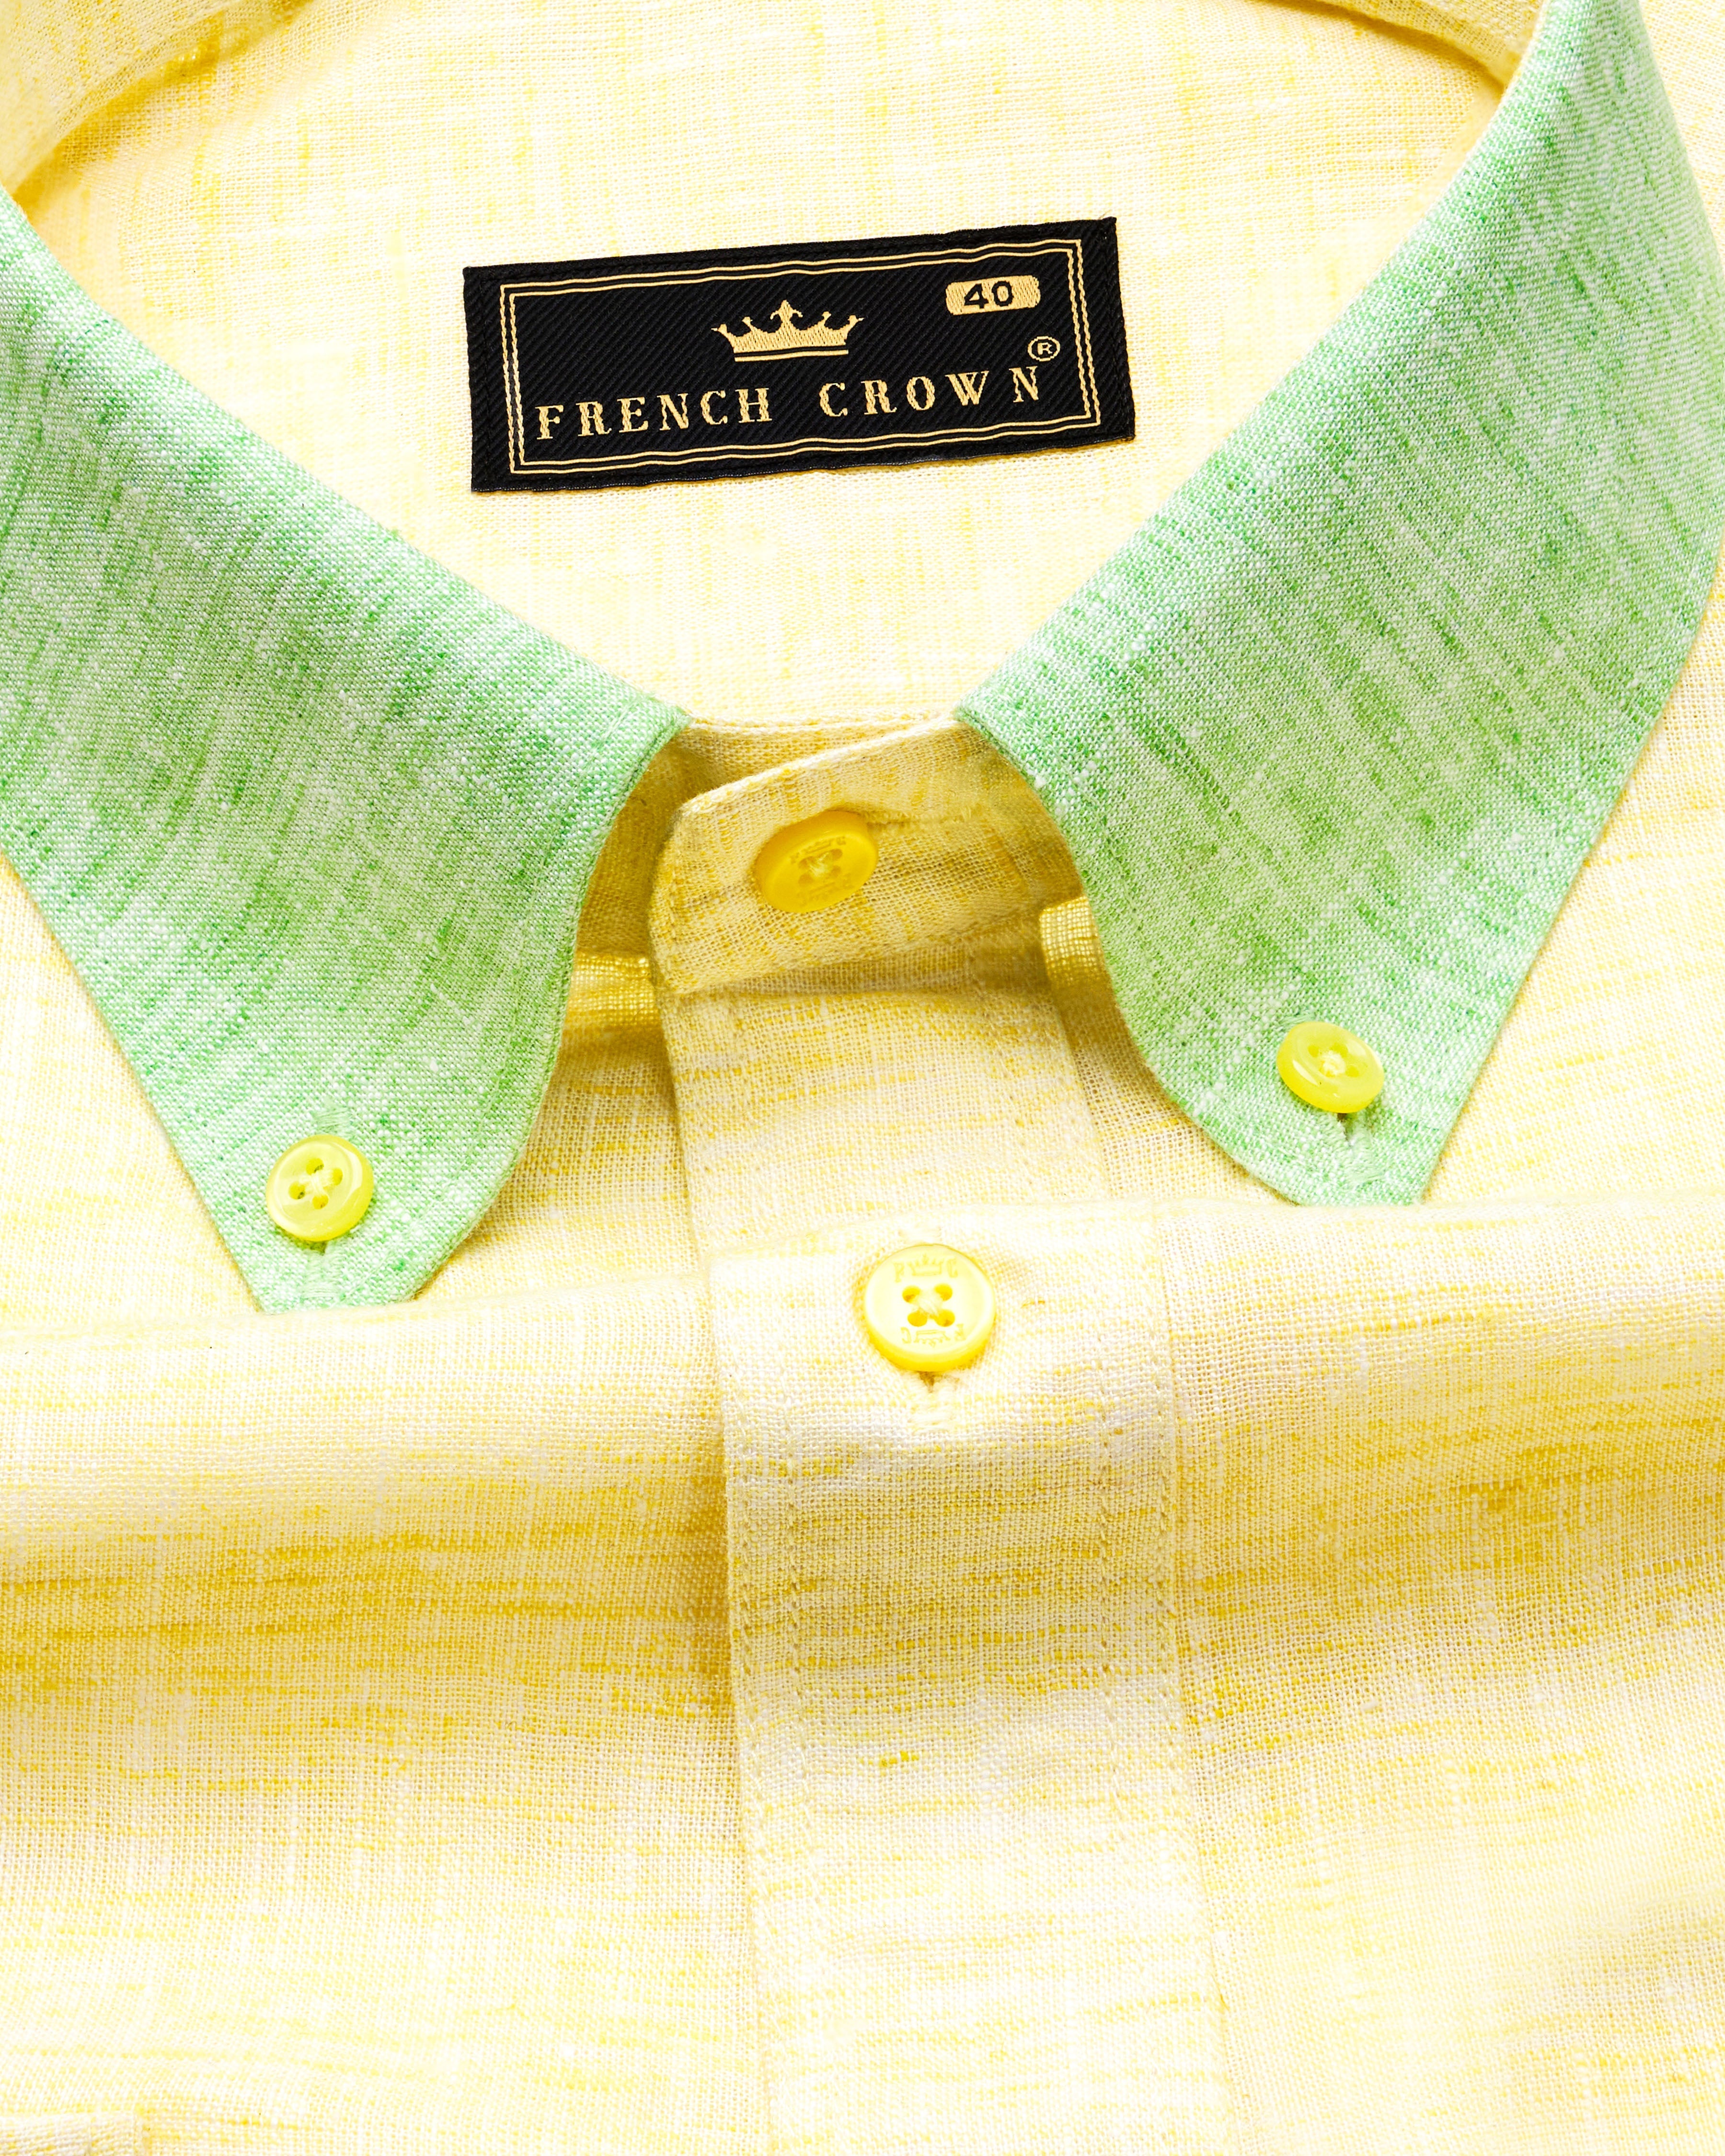 Citrine Yellow and Green Luxurious Linen Designer Shirt 9607-BD-YL-FP-P545-38,9607-BD-YL-FP-P545-H-38,9607-BD-YL-FP-P545-39,9607-BD-YL-FP-P545-H-39,9607-BD-YL-FP-P545-40,9607-BD-YL-FP-P545-H-40,9607-BD-YL-FP-P545-42,9607-BD-YL-FP-P545-H-42,9607-BD-YL-FP-P545-44,9607-BD-YL-FP-P545-H-44,9607-BD-YL-FP-P545-46,9607-BD-YL-FP-P545-H-46,9607-BD-YL-FP-P545-48,9607-BD-YL-FP-P545-H-48,9607-BD-YL-FP-P545-50,9607-BD-YL-FP-P545-H-50,9607-BD-YL-FP-P545-52,9607-BD-YL-FP-P545-H-52